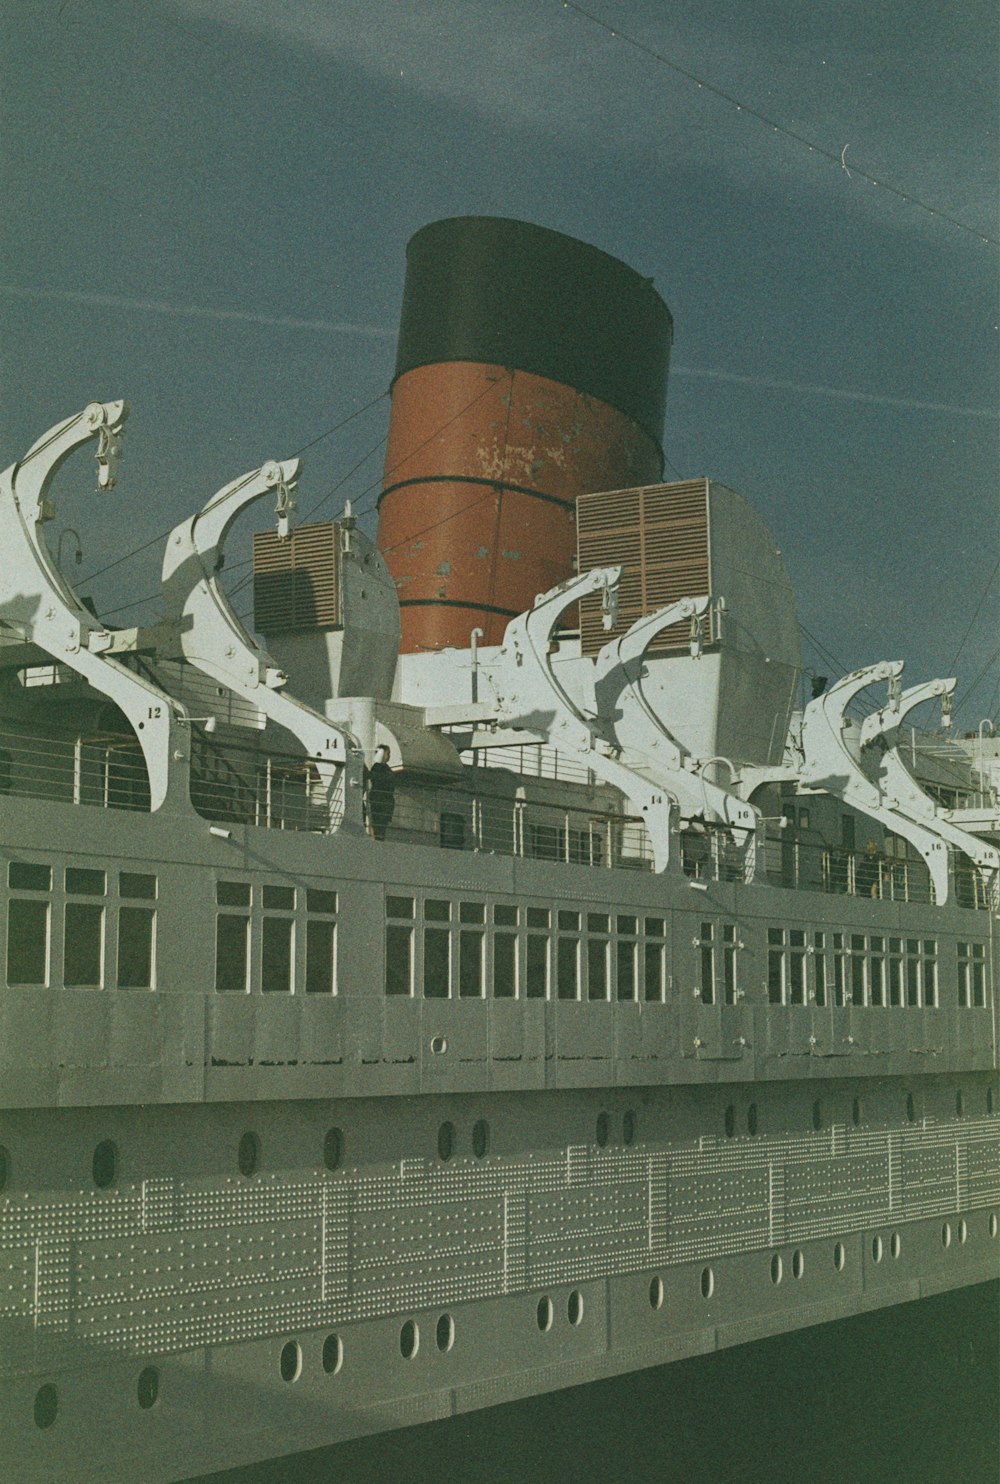 a large ship with a large tower on top of it